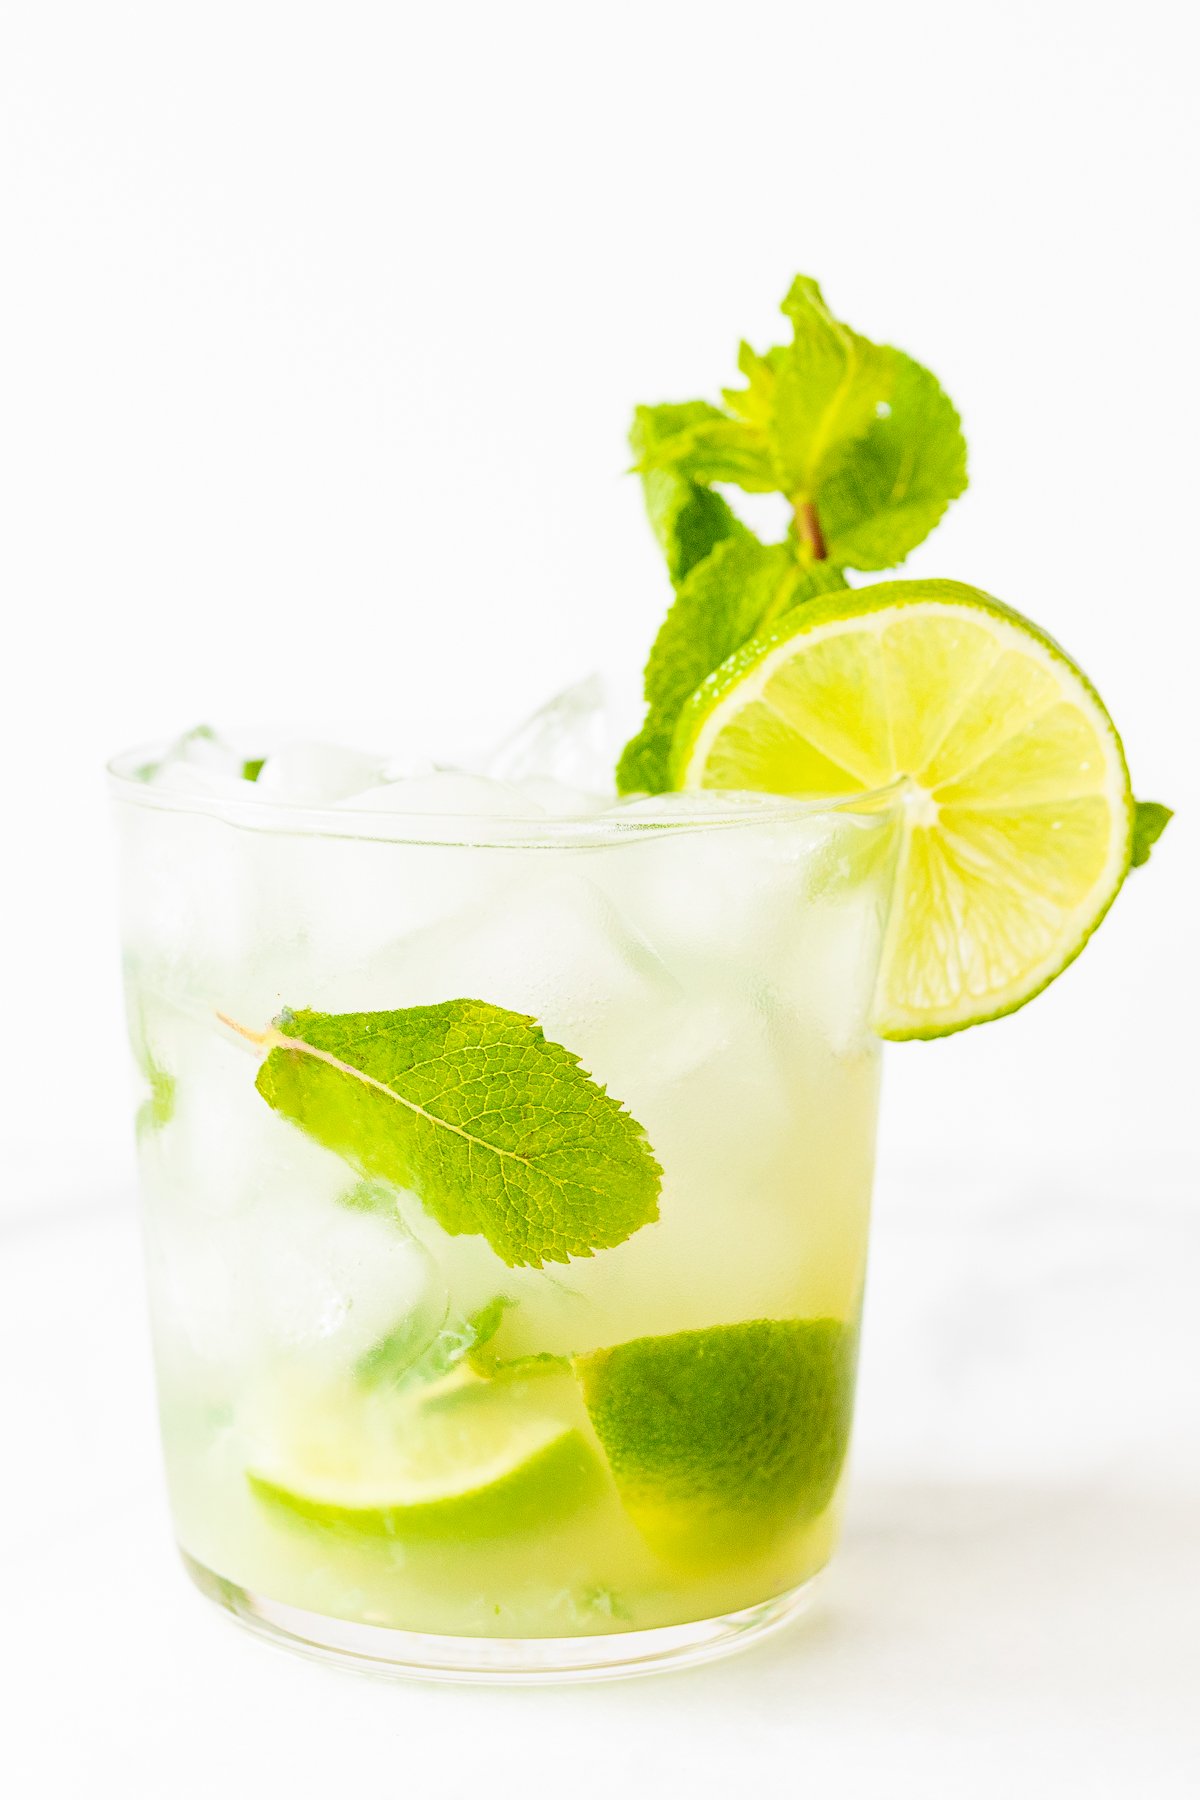 A glass of skinny mojito with lime slices, mint leaves, and ice cubes on a white background.